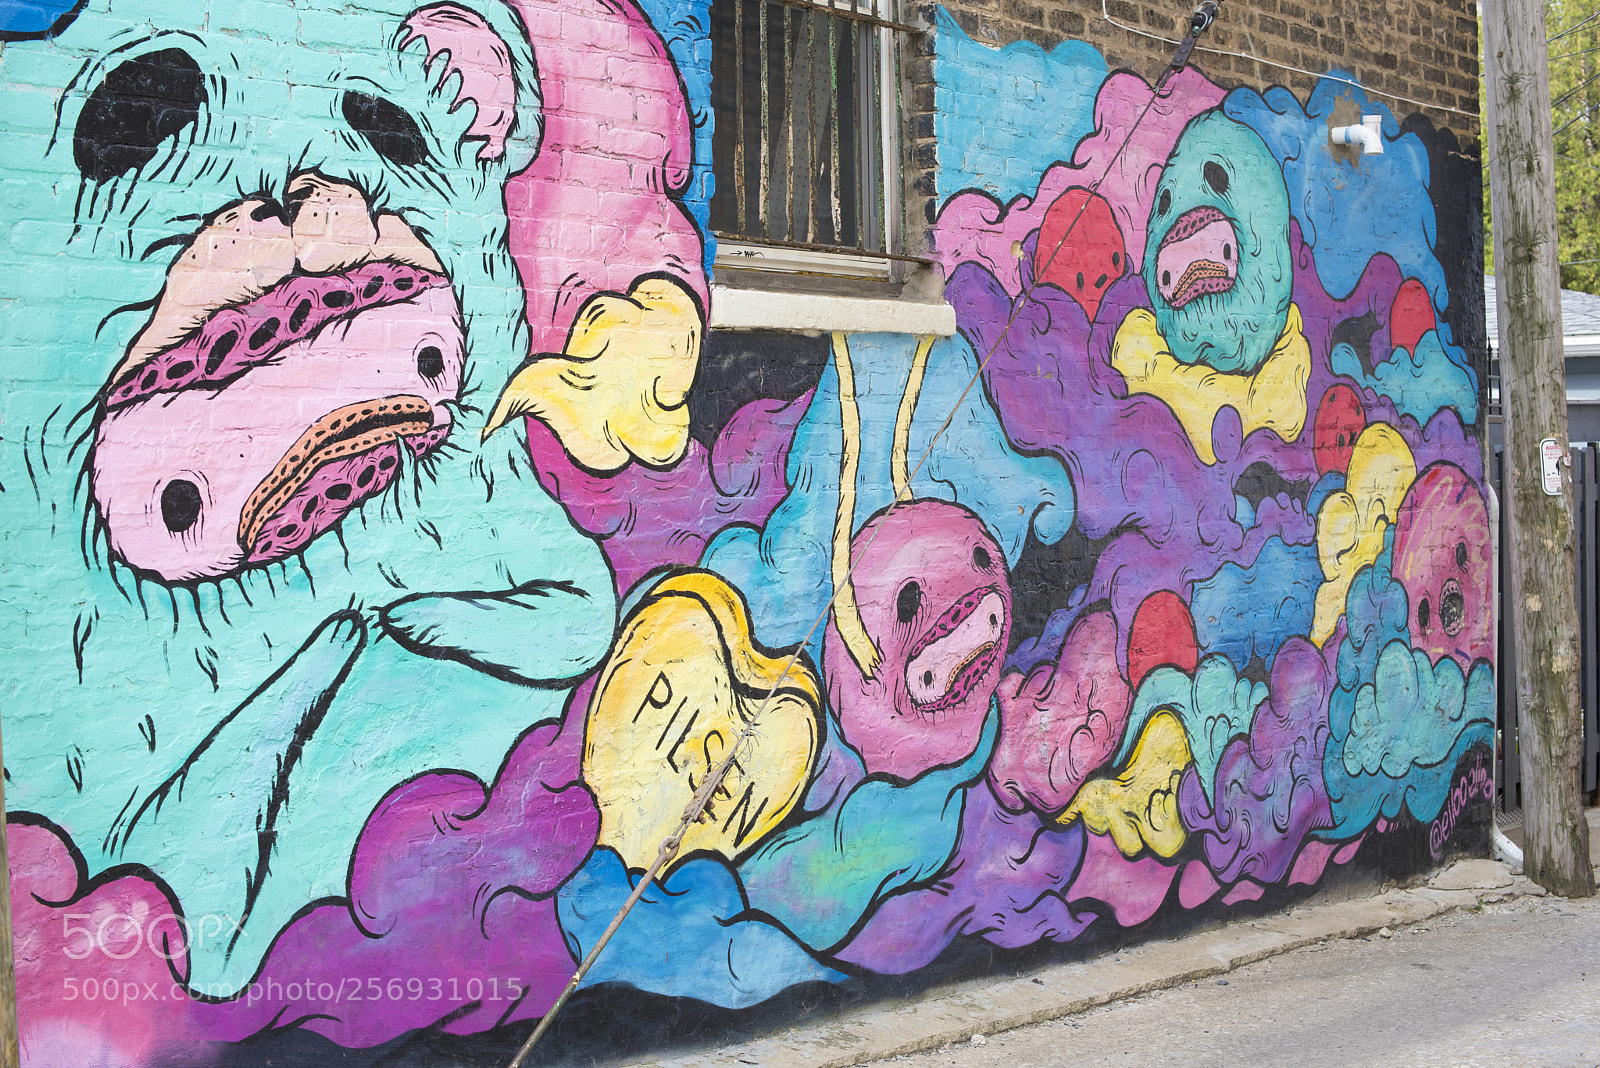 Nikon D810 sample photo. Mural on building in photography